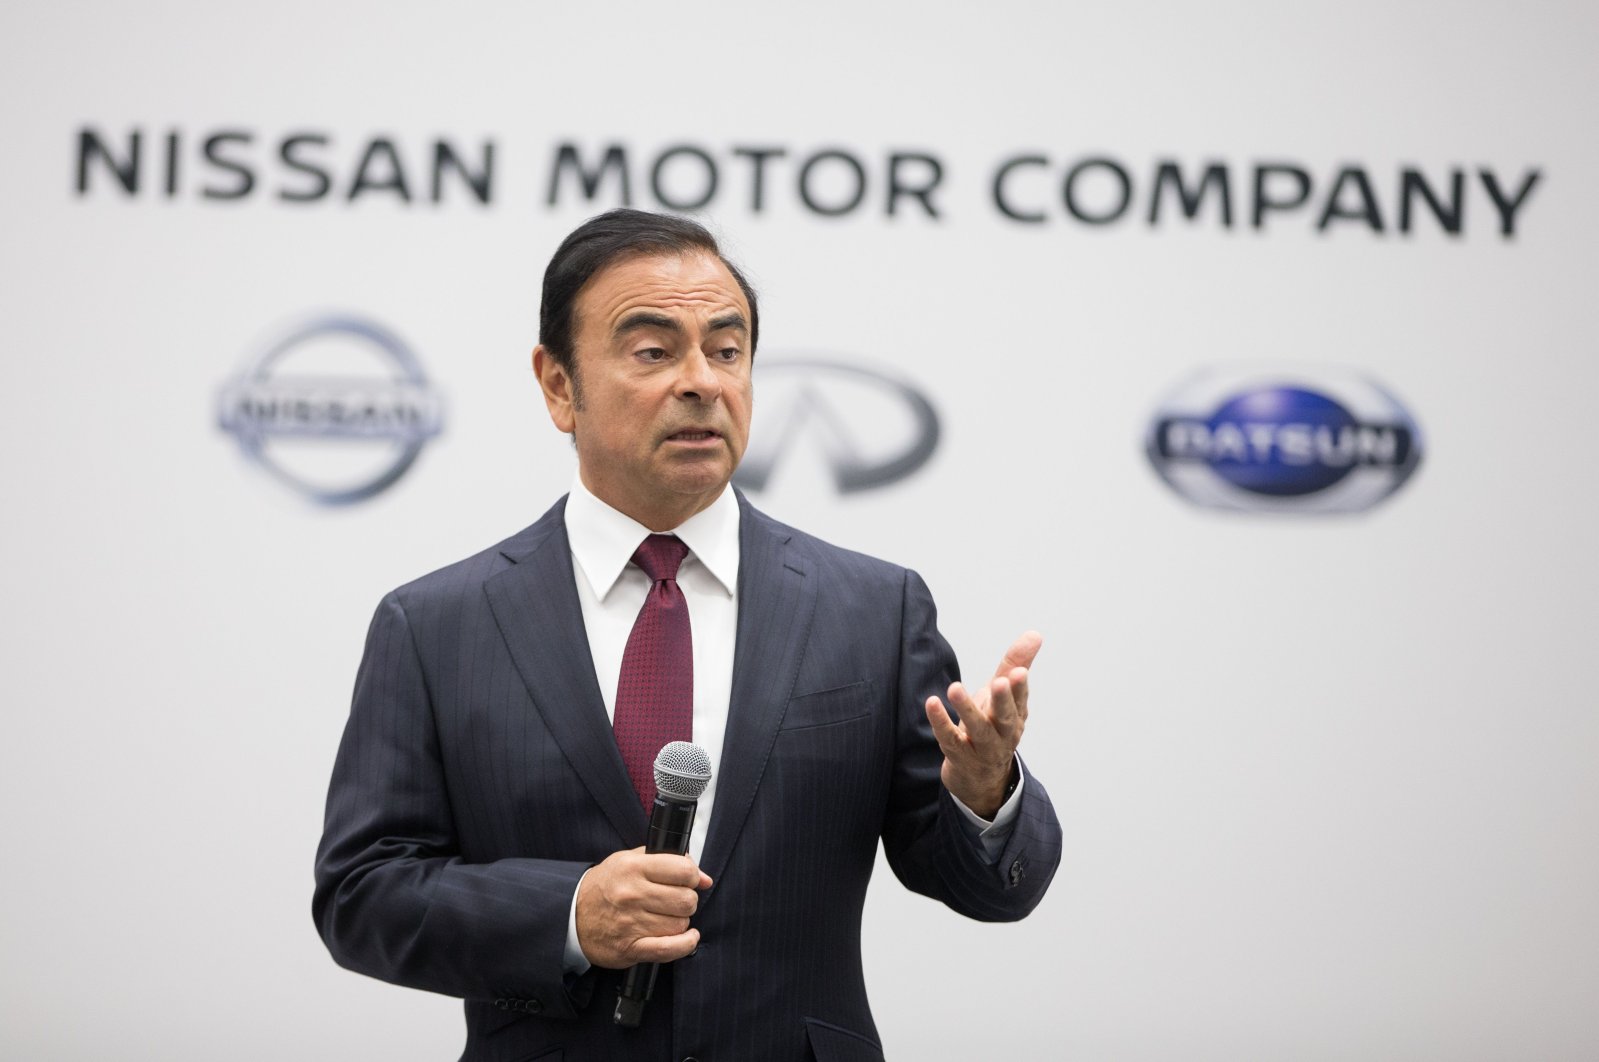 Carlos Ghosn, former CEO Nissan Motor Company, speaks to reporters during a press conference at the 2016 North American International Auto Show in Detroit, Michigan, U.S., Jan. 11, 2016. (AFP Photo)